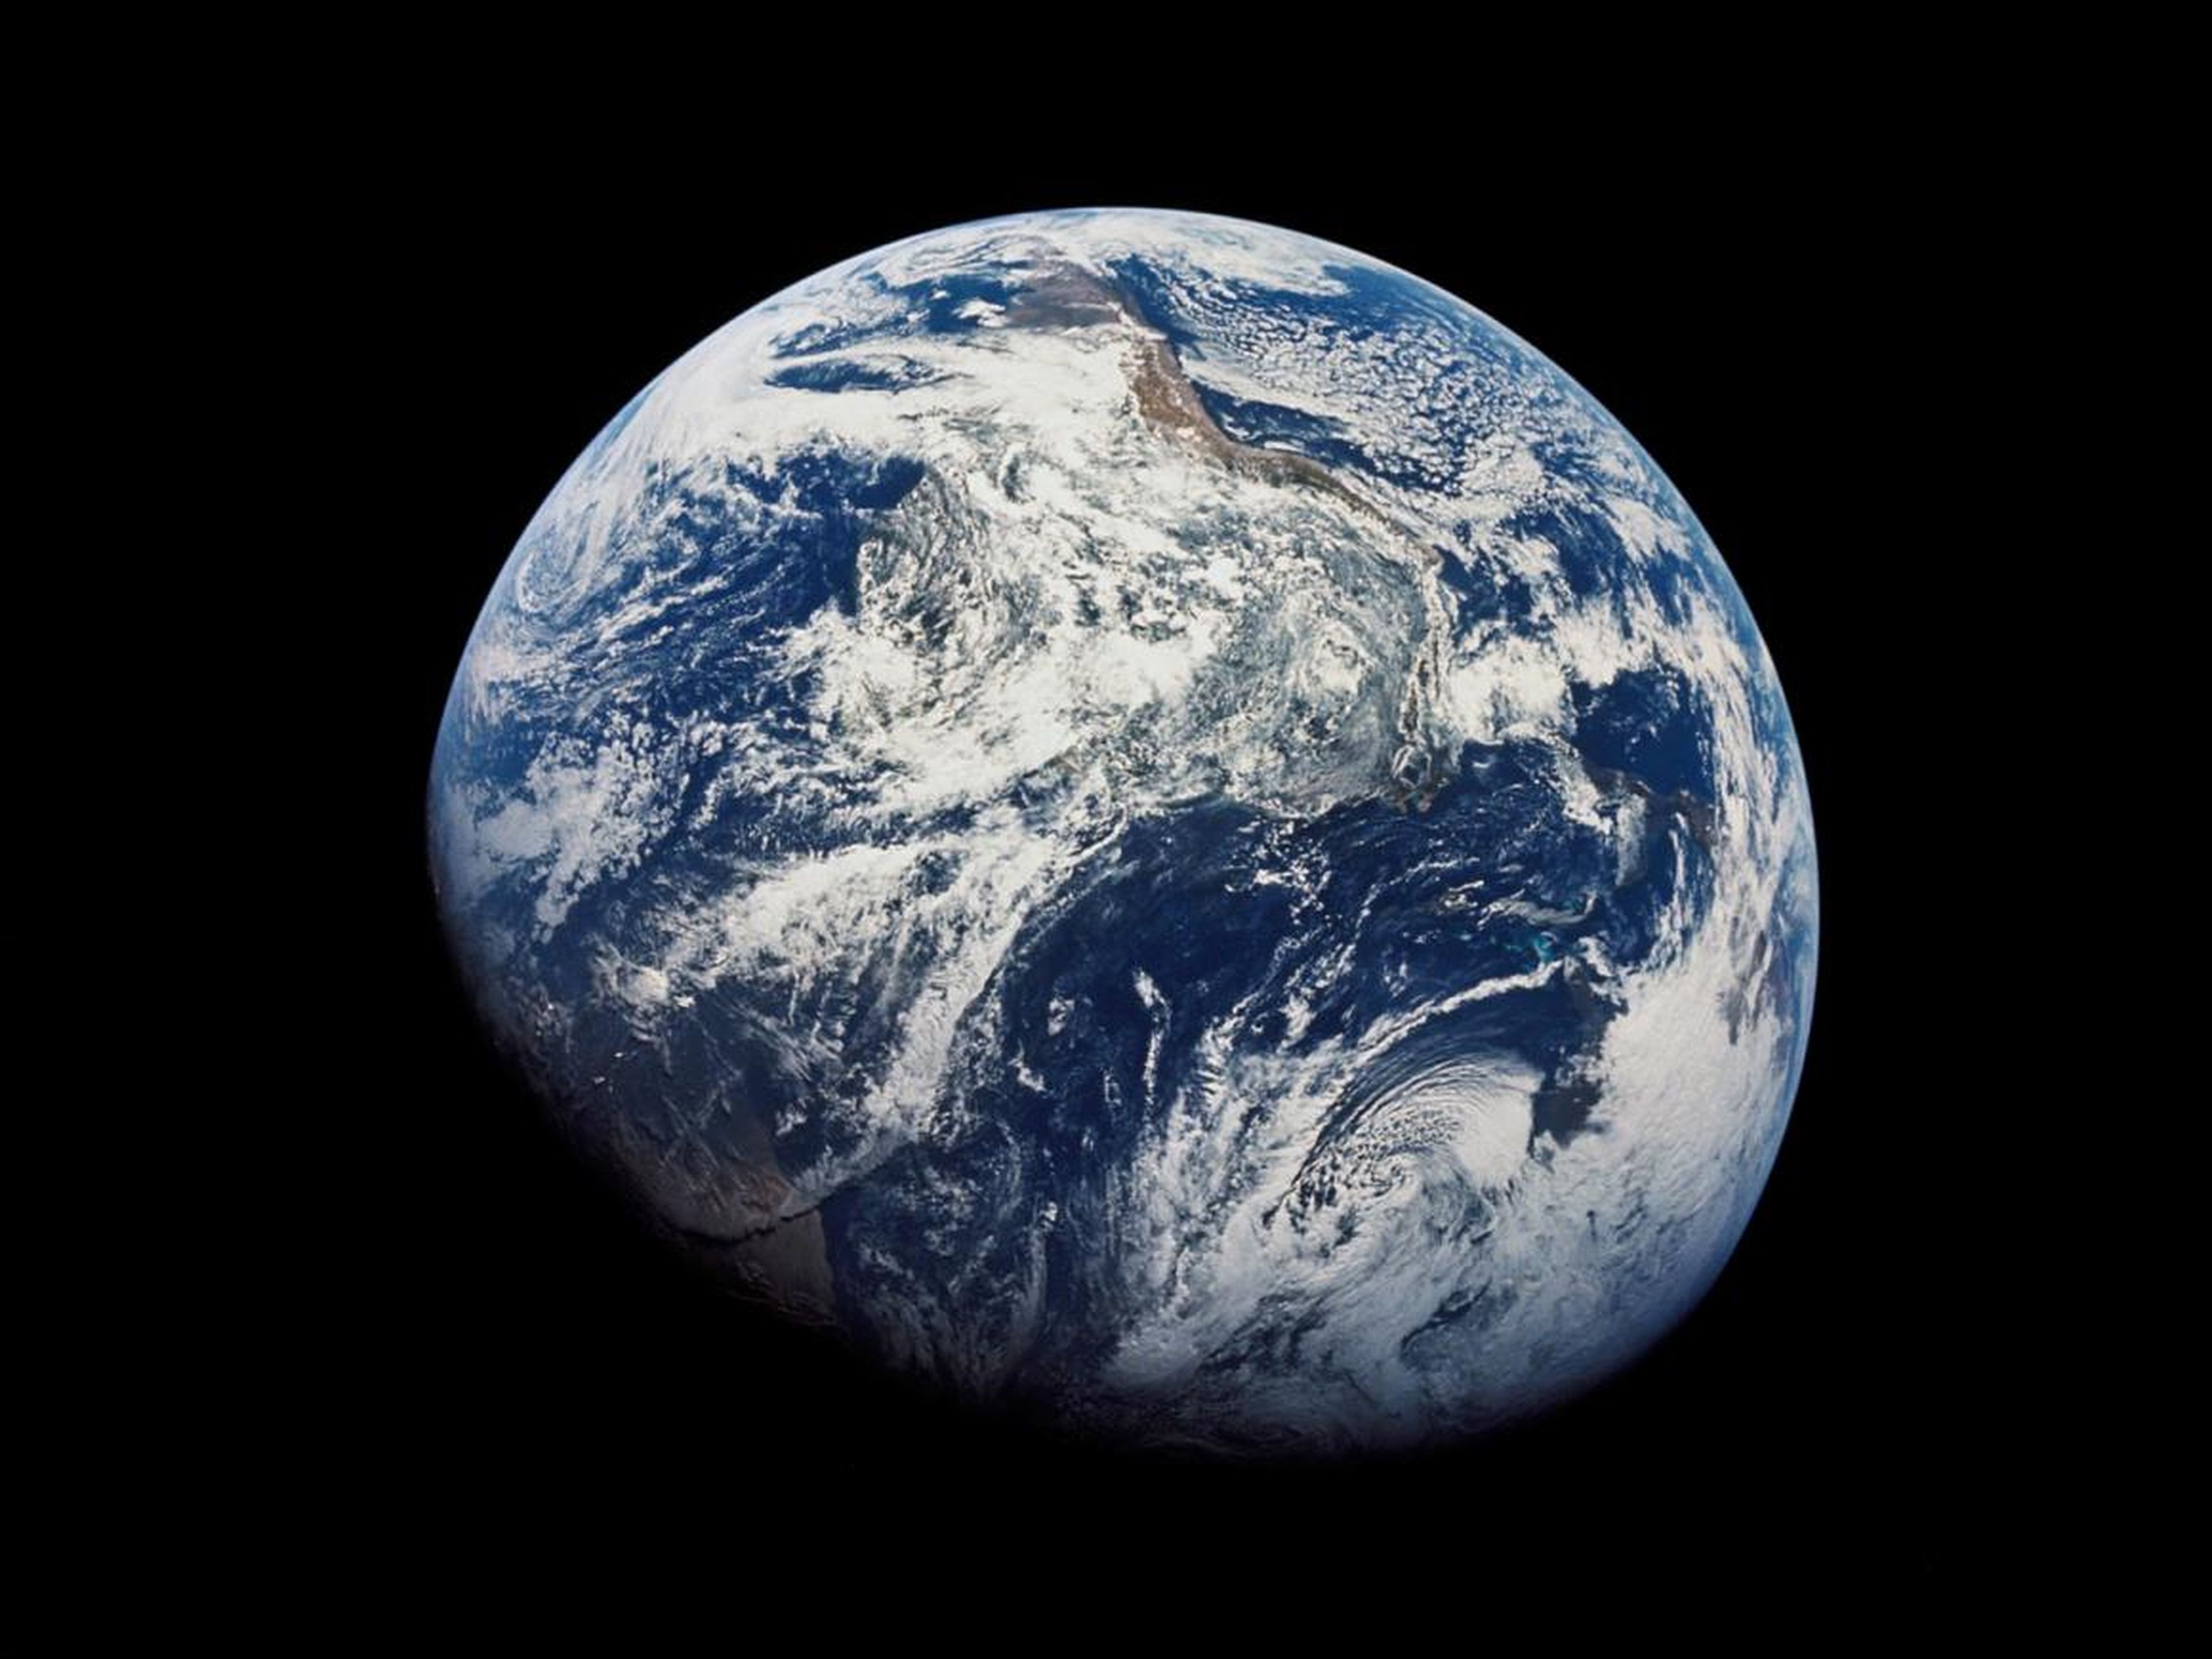 Earth from space as seen by Apollo 8 astronauts.